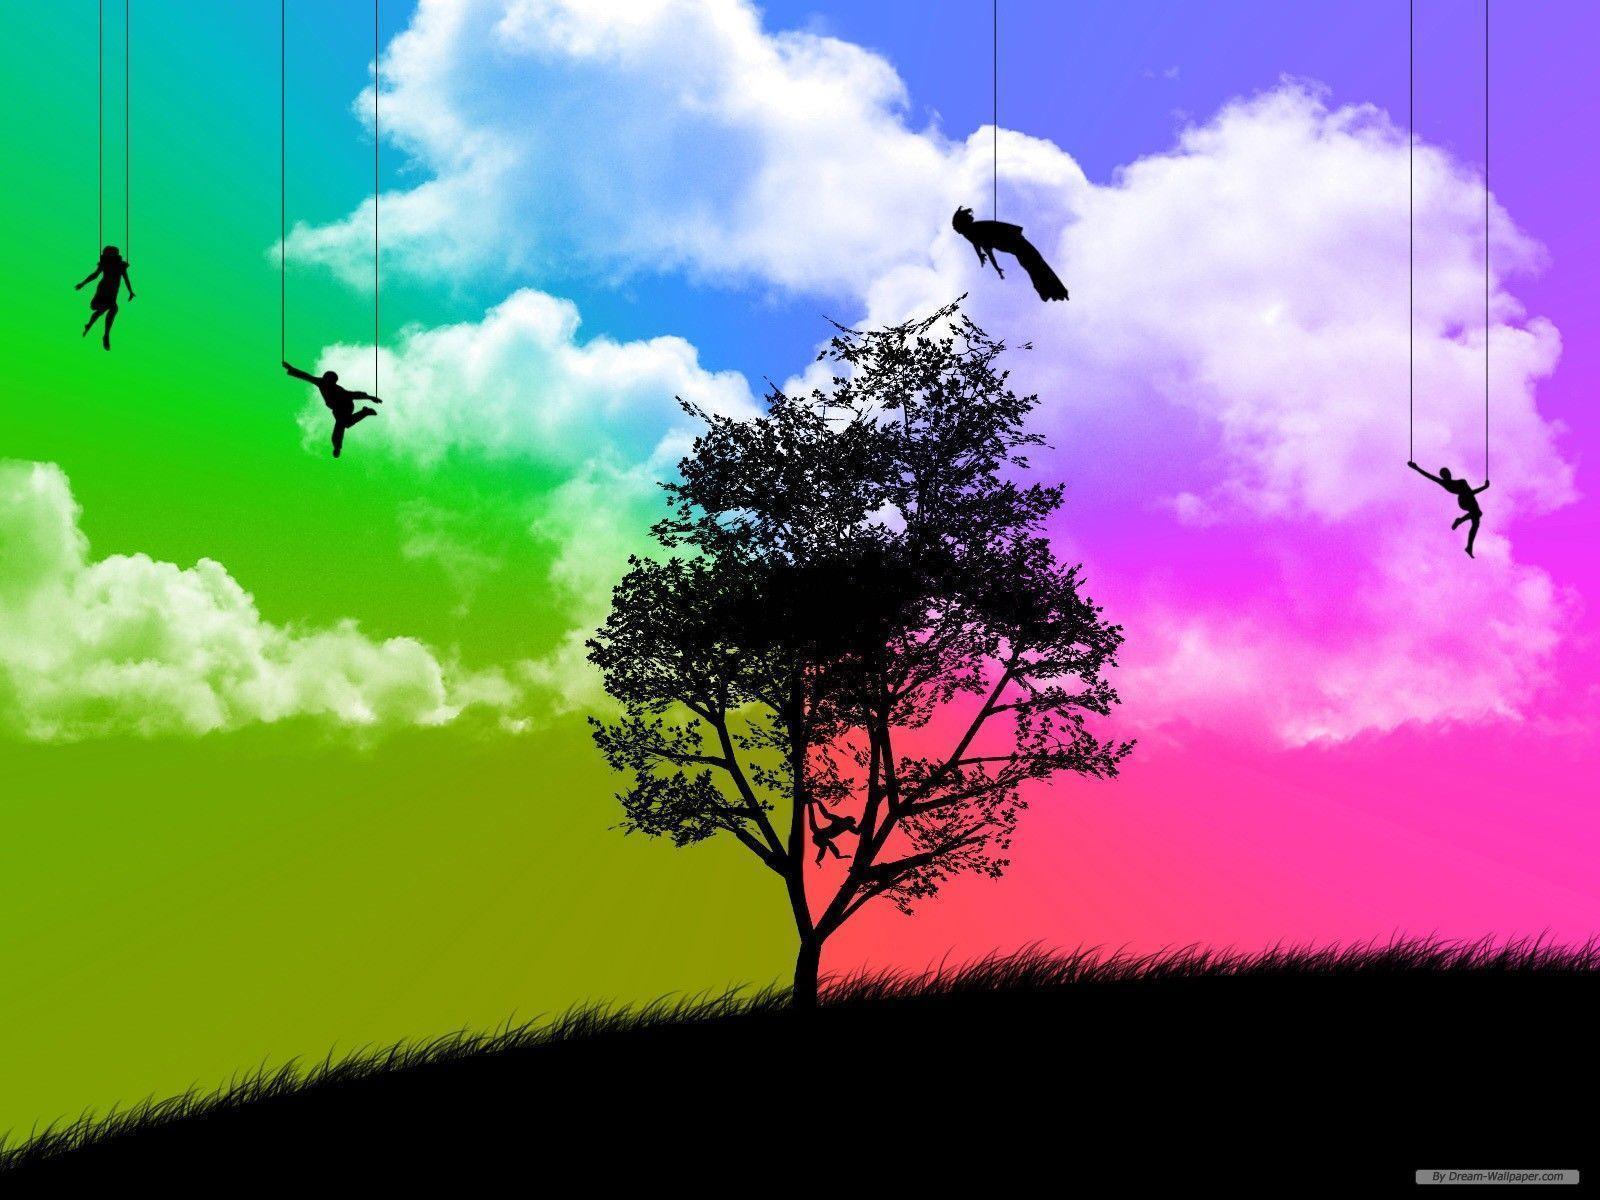 Silhouette Windows 8 Theme and Background. Download free windows